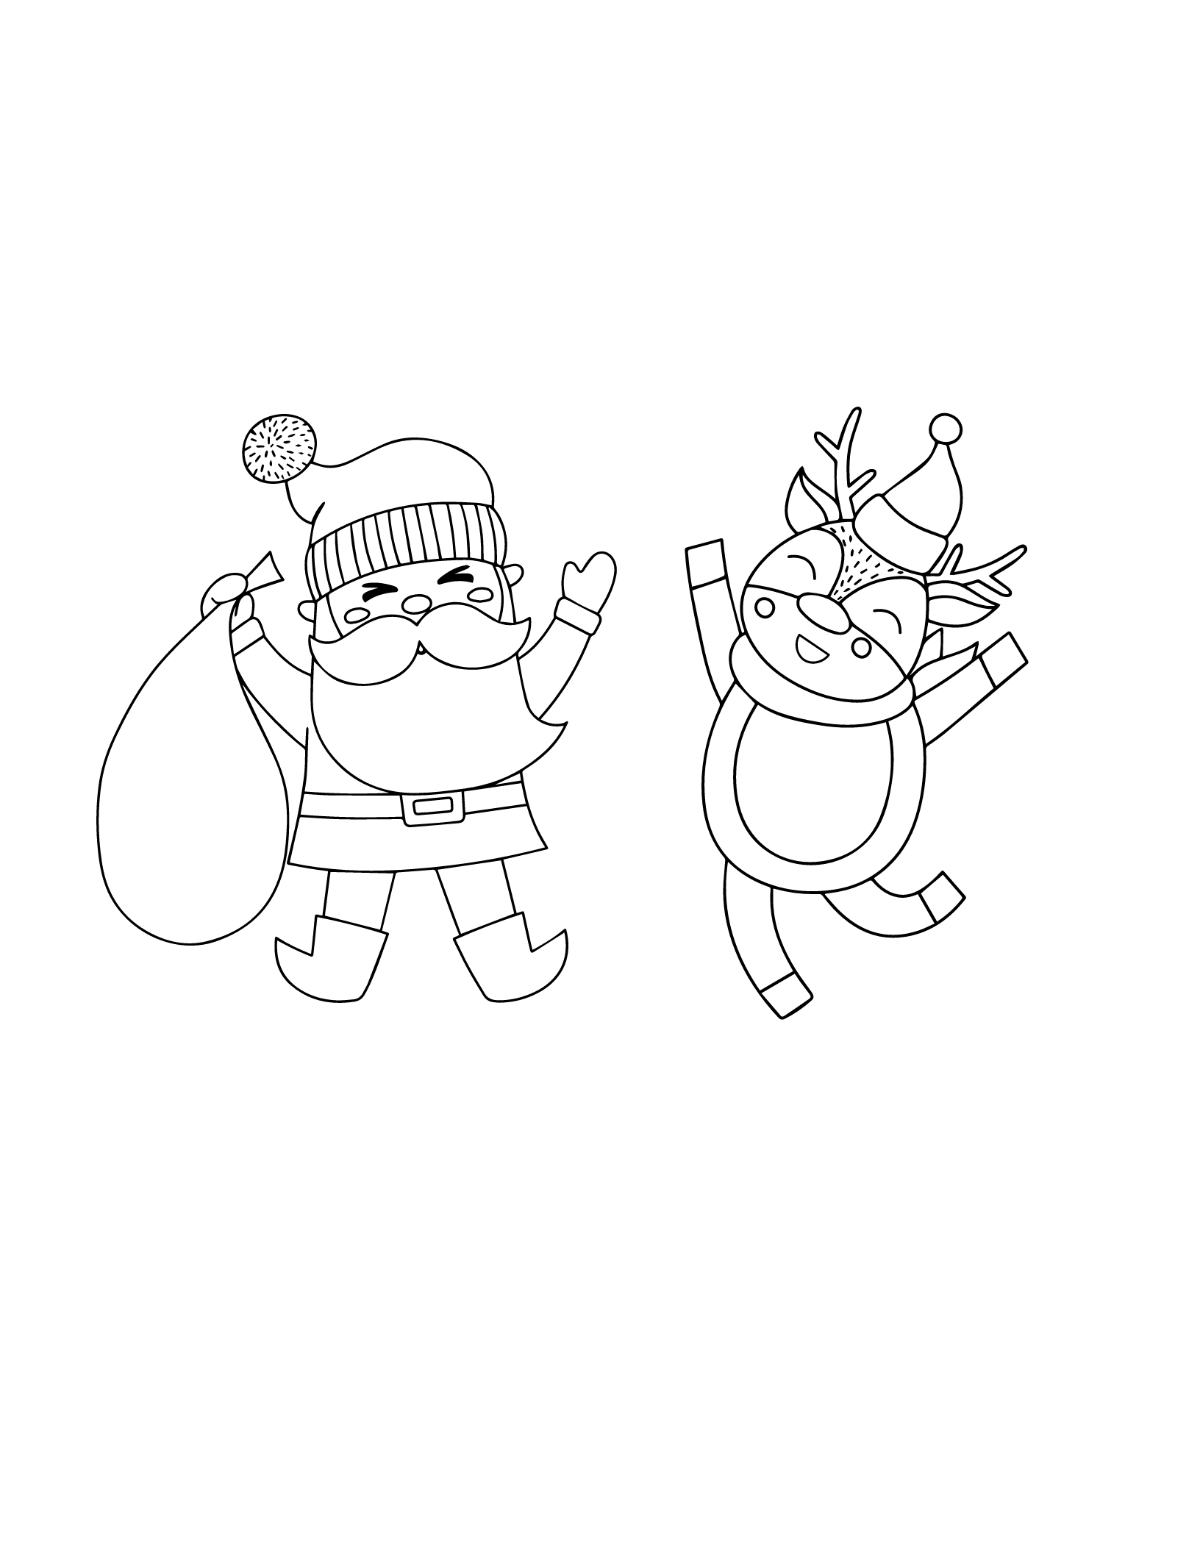 Cute Christmas Coloring Page Template